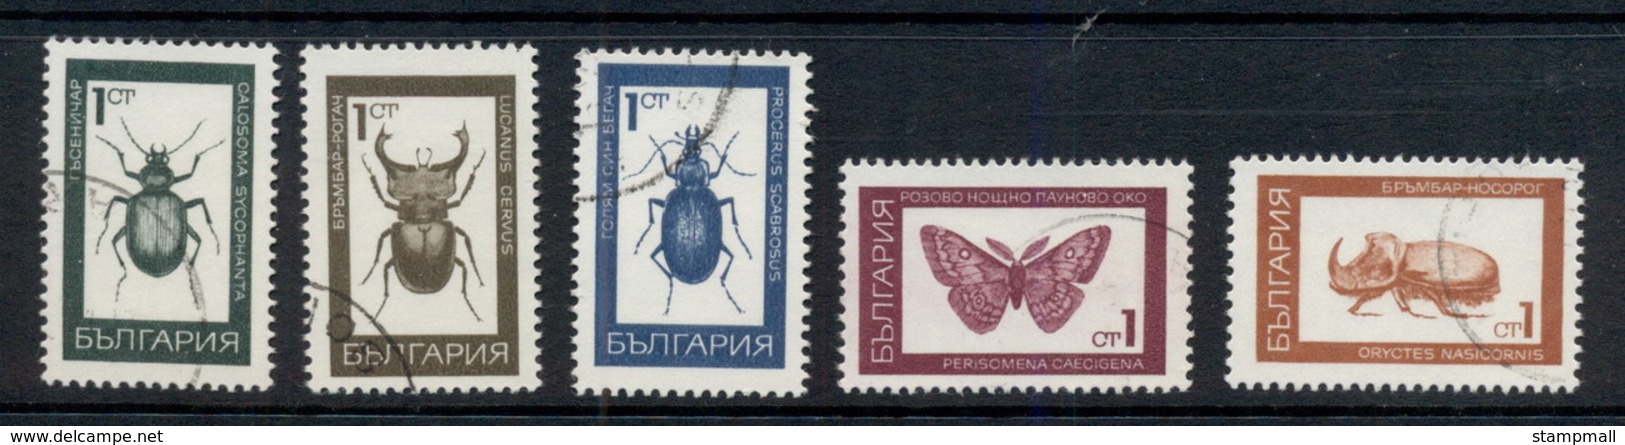 Bulgaria 1968 Insects Beetles CTO - Unused Stamps